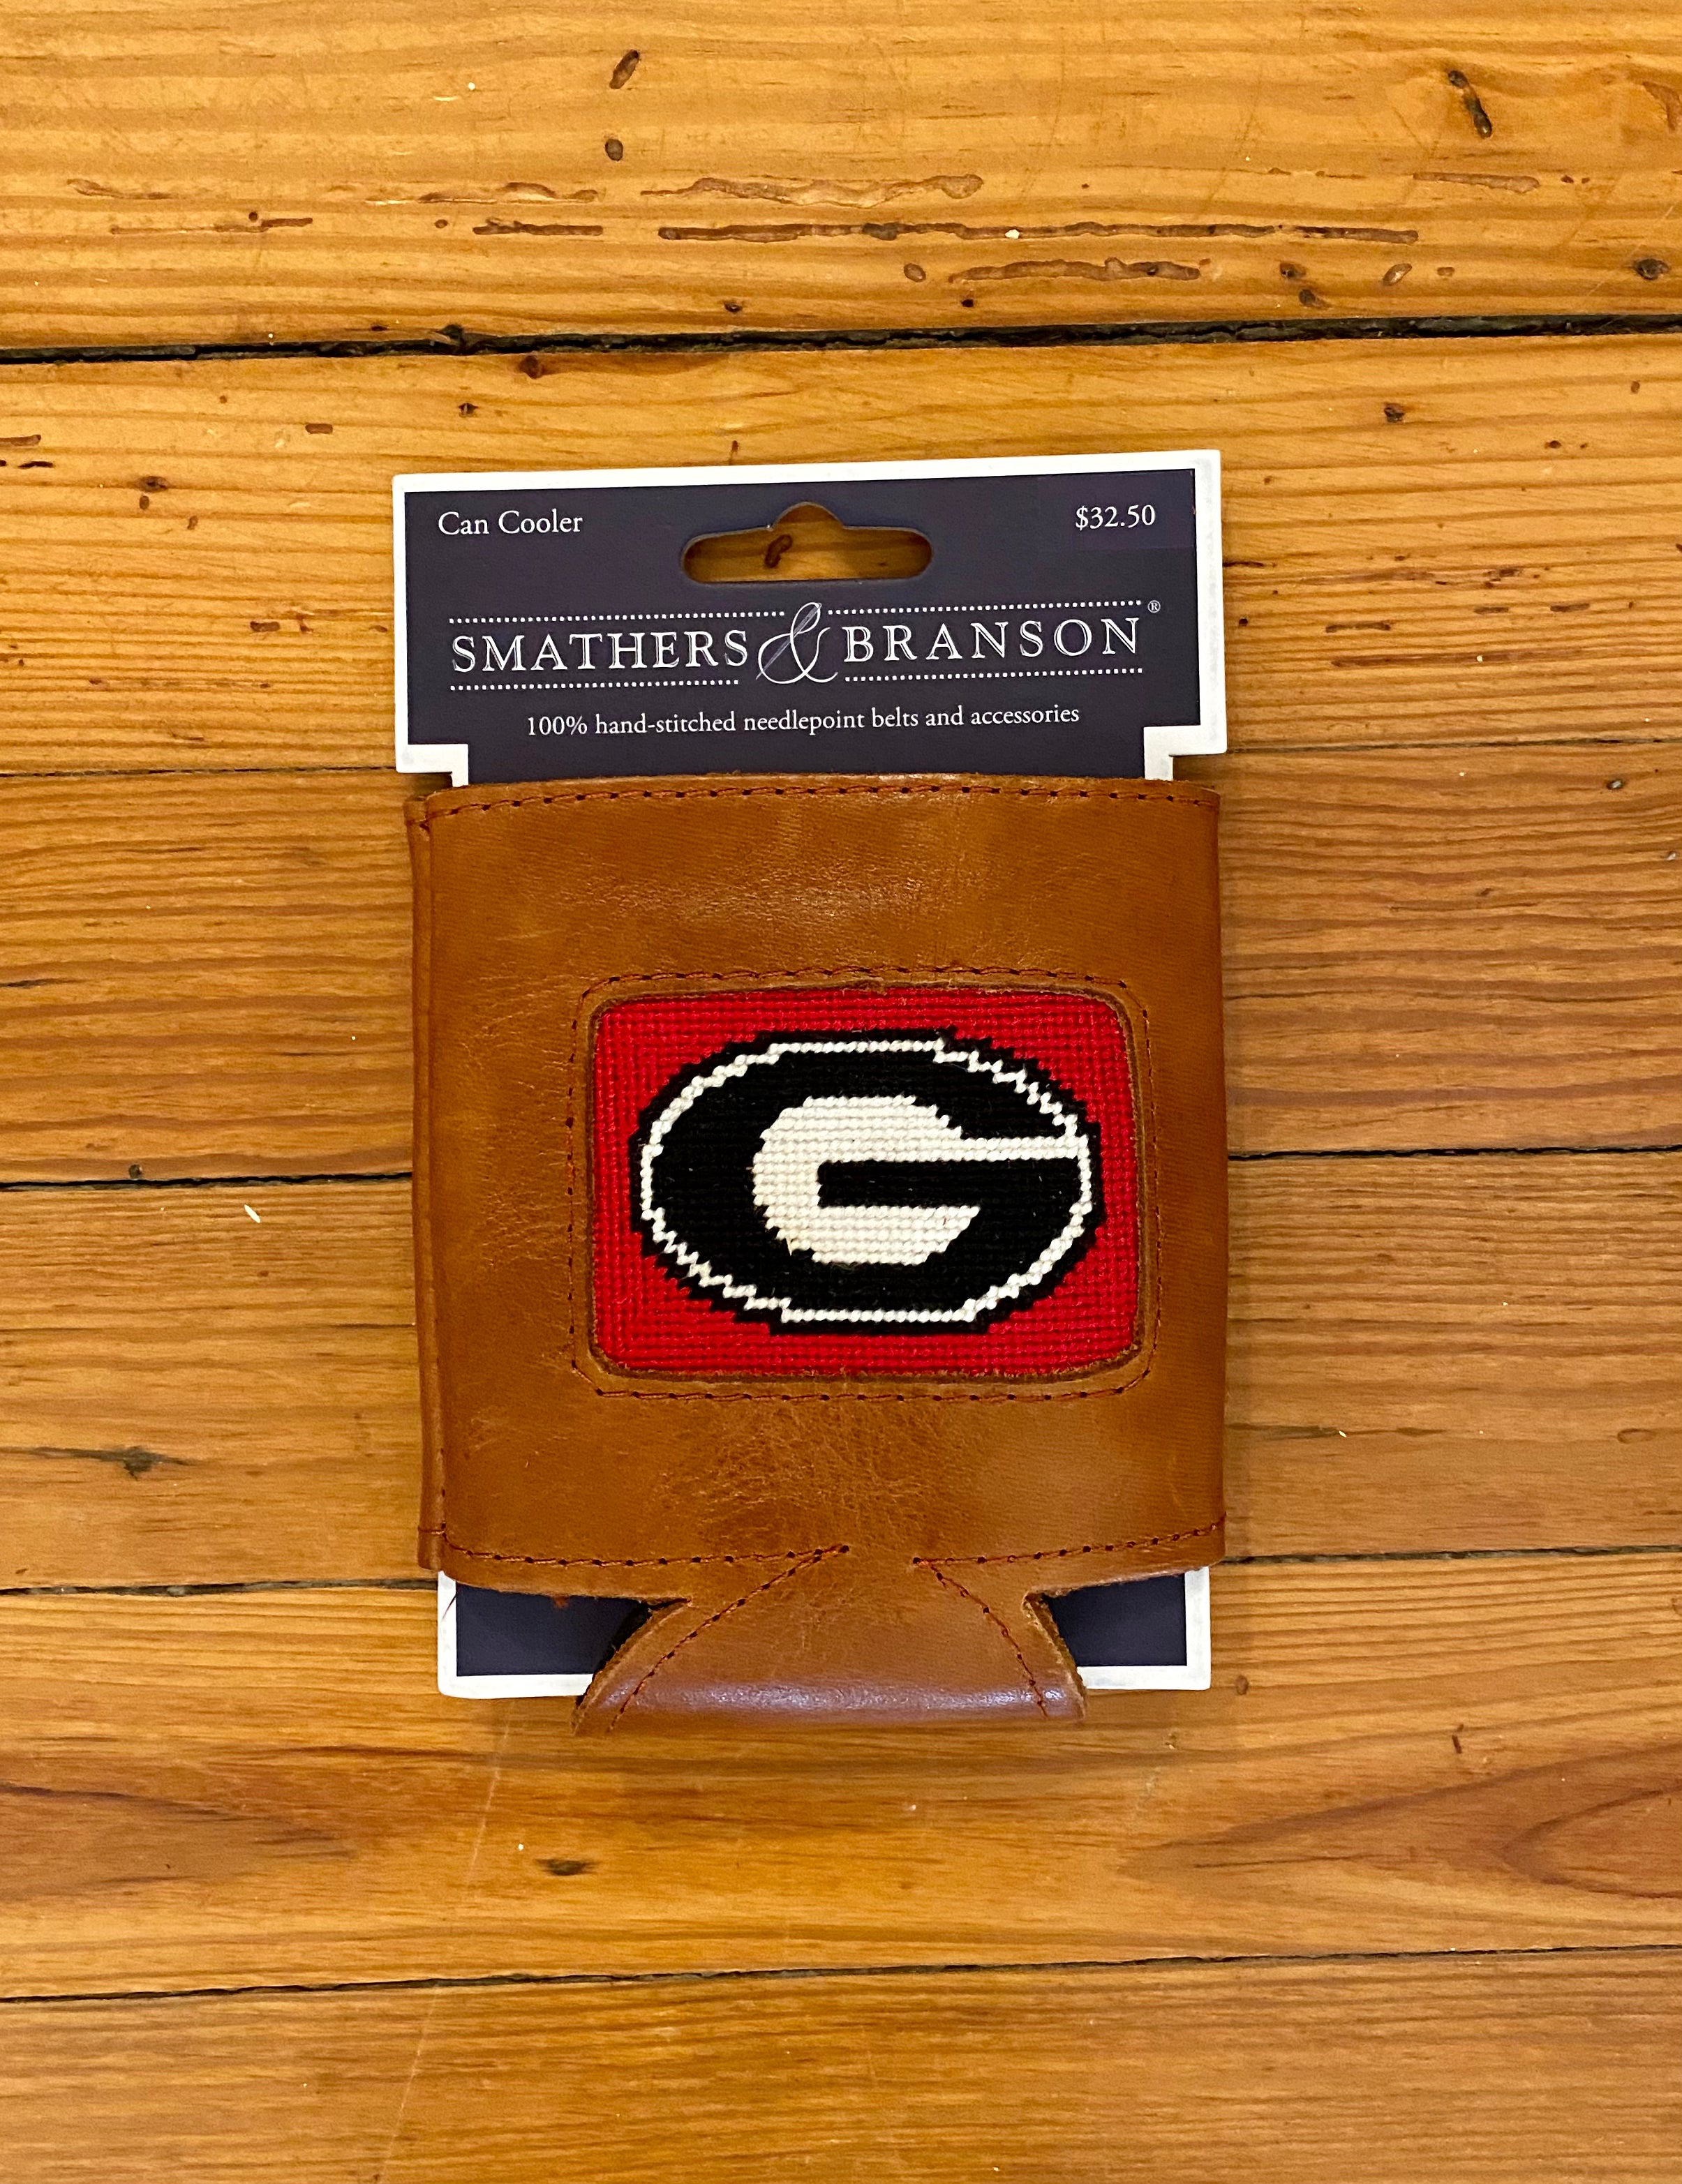 uga smathers and branson can cooler